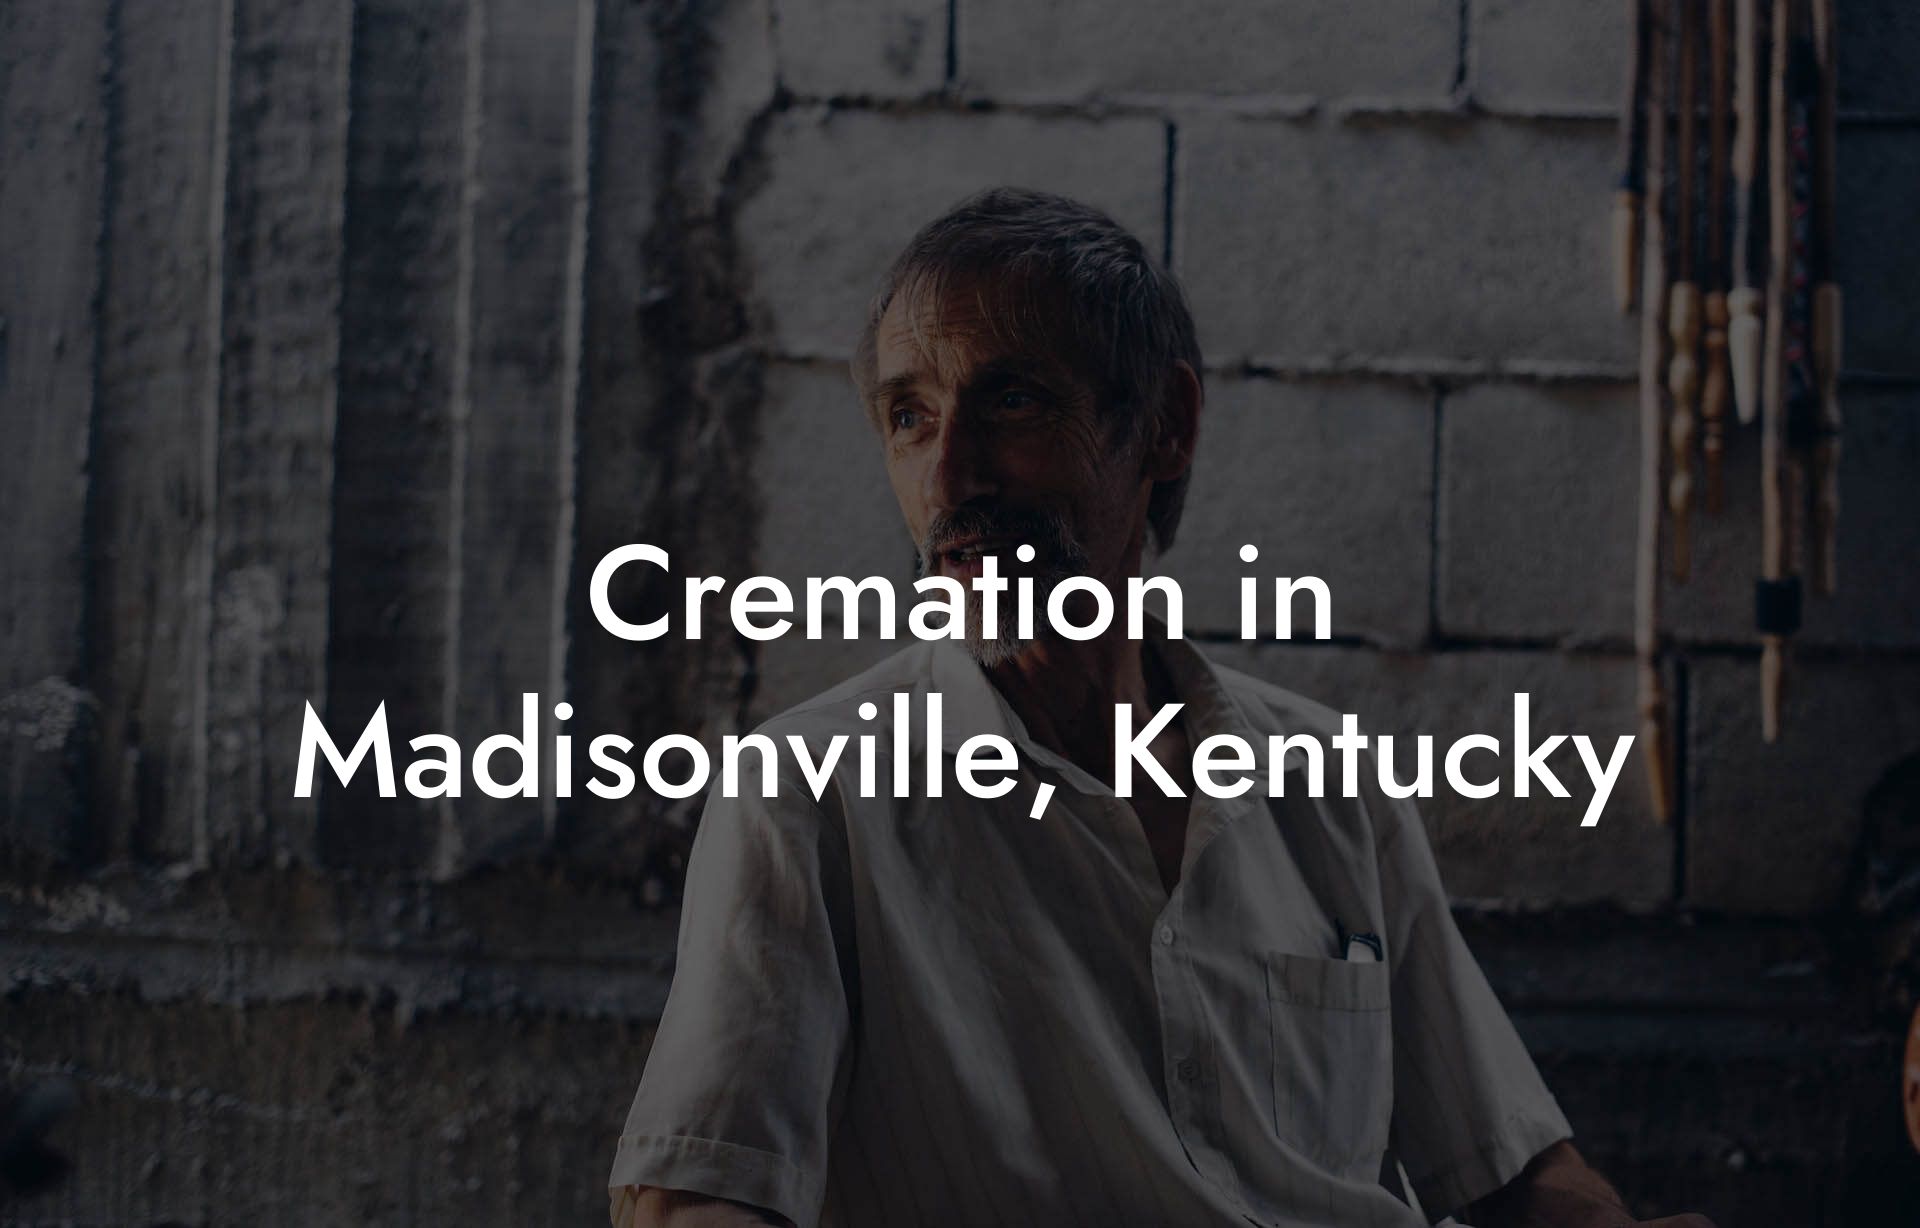 Cremation in Madisonville, Kentucky